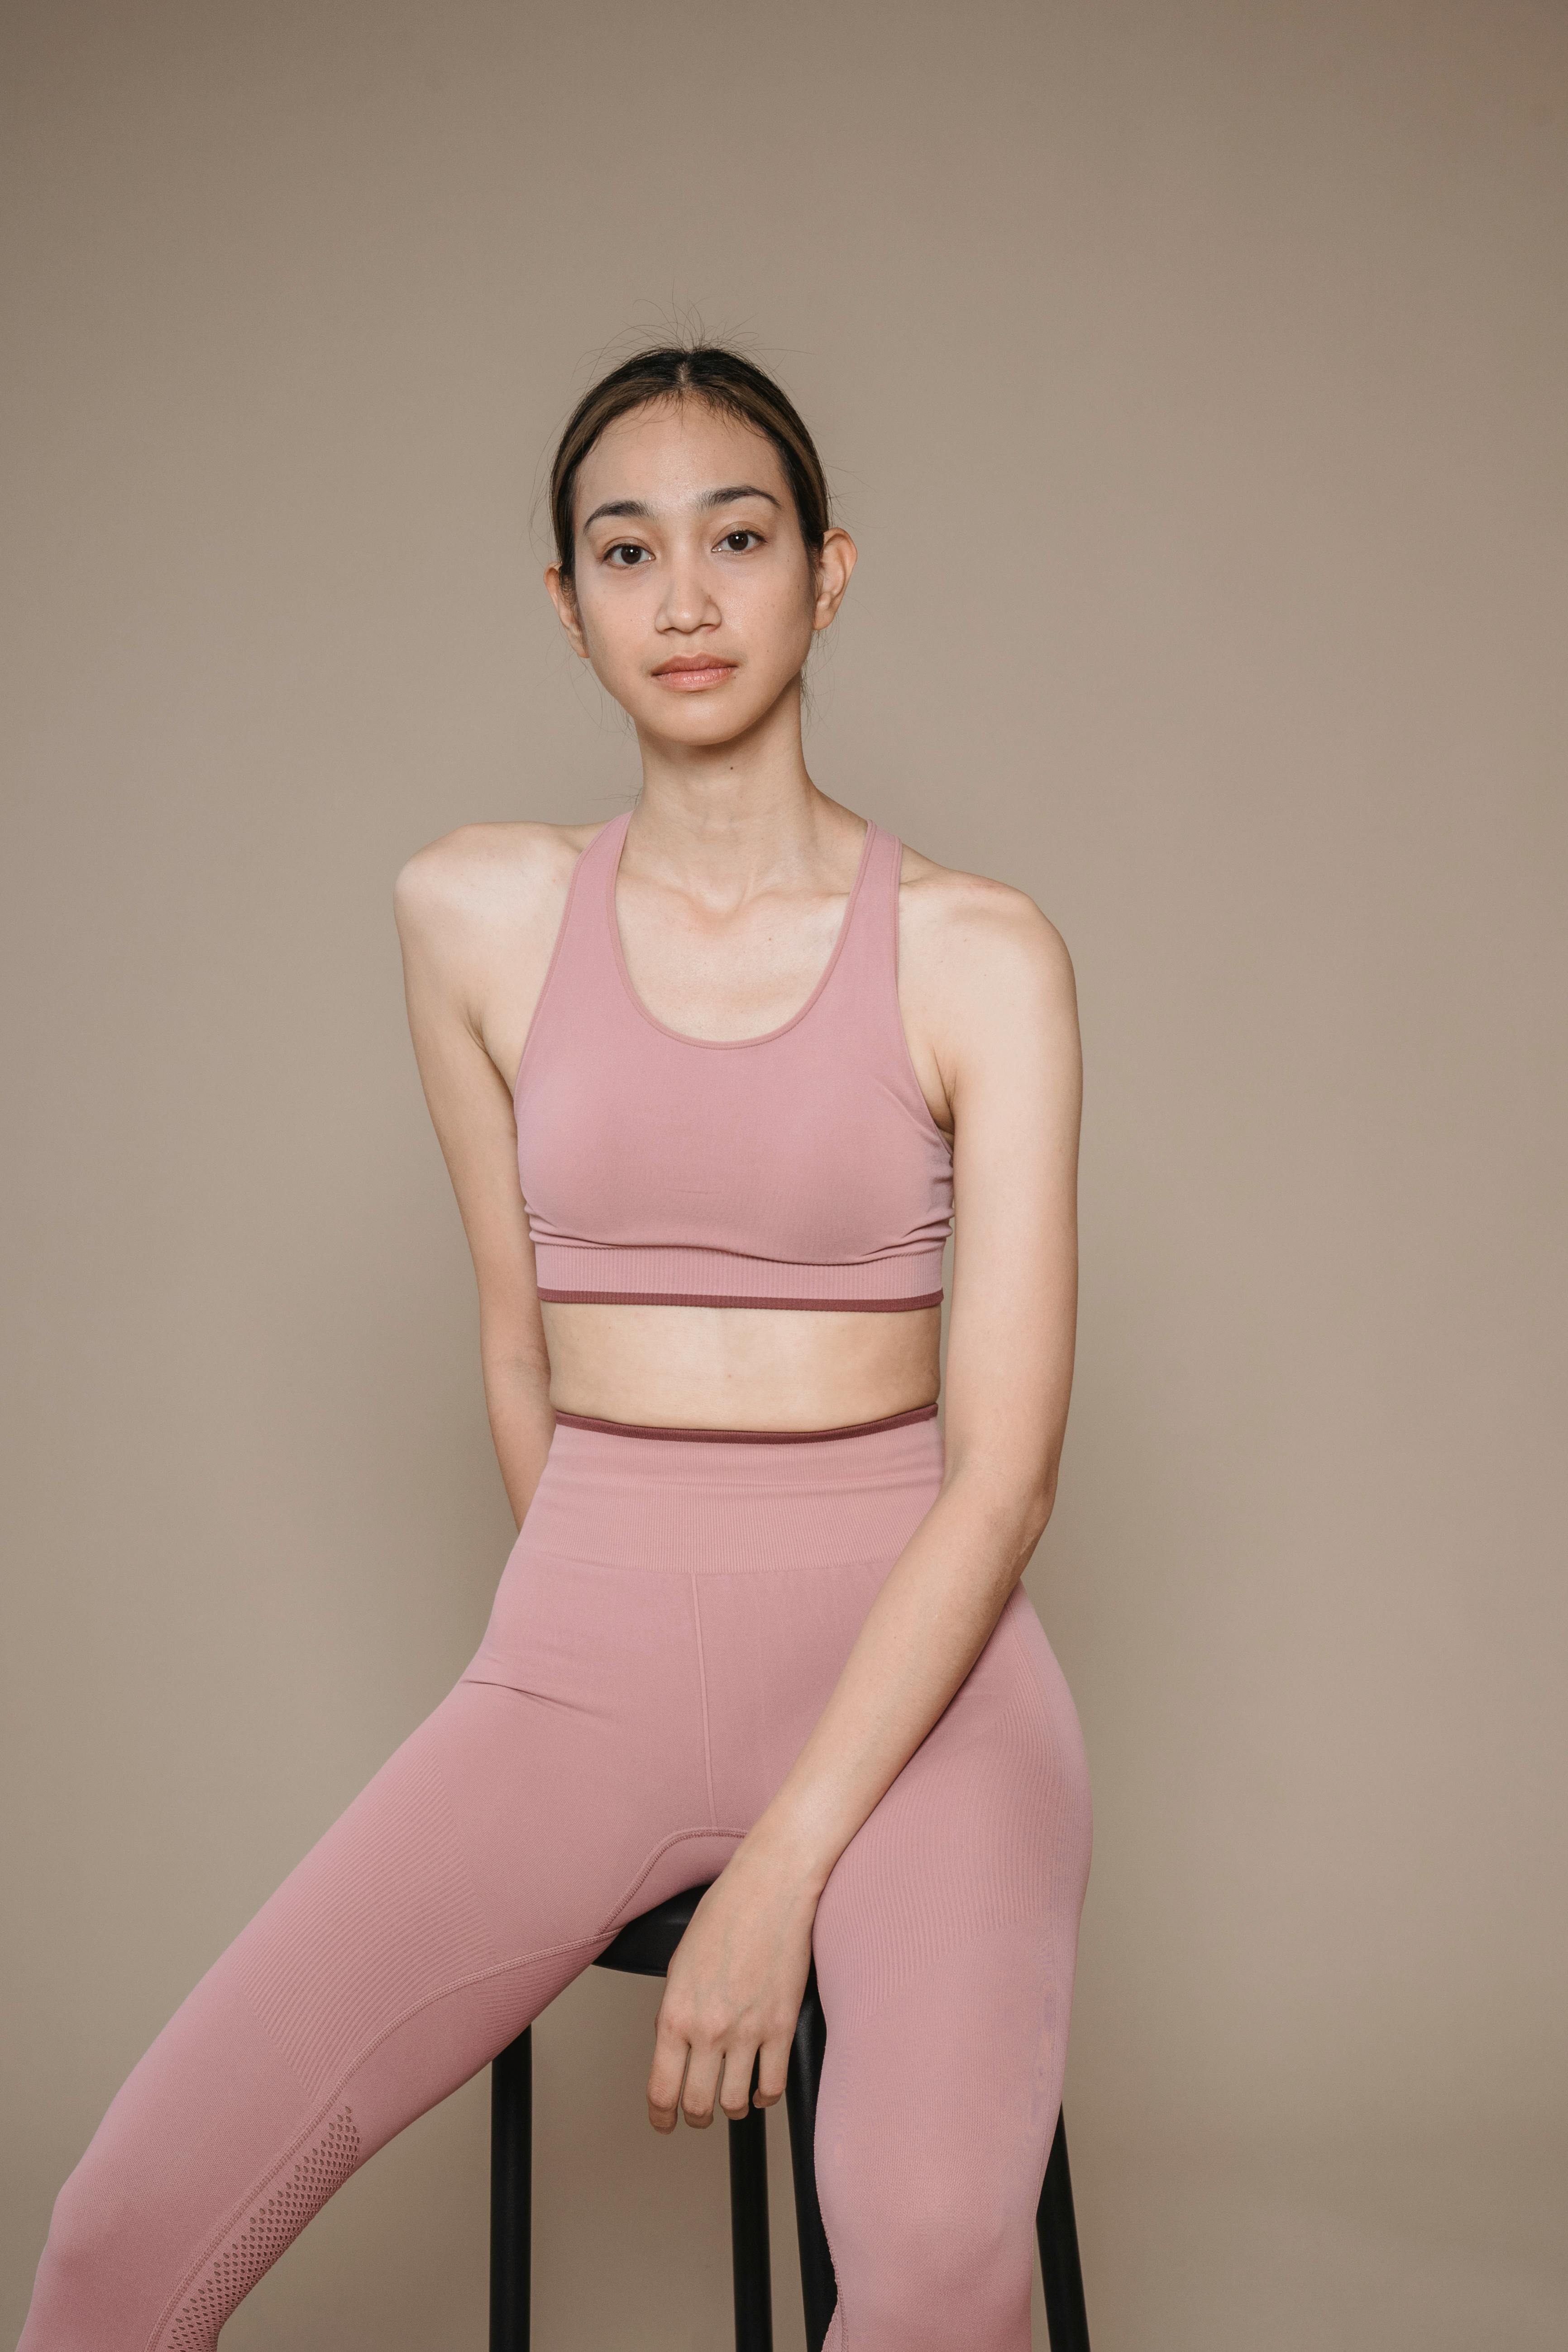 Photo of a Woman in Pink Activewear Looking at the Camera · Free